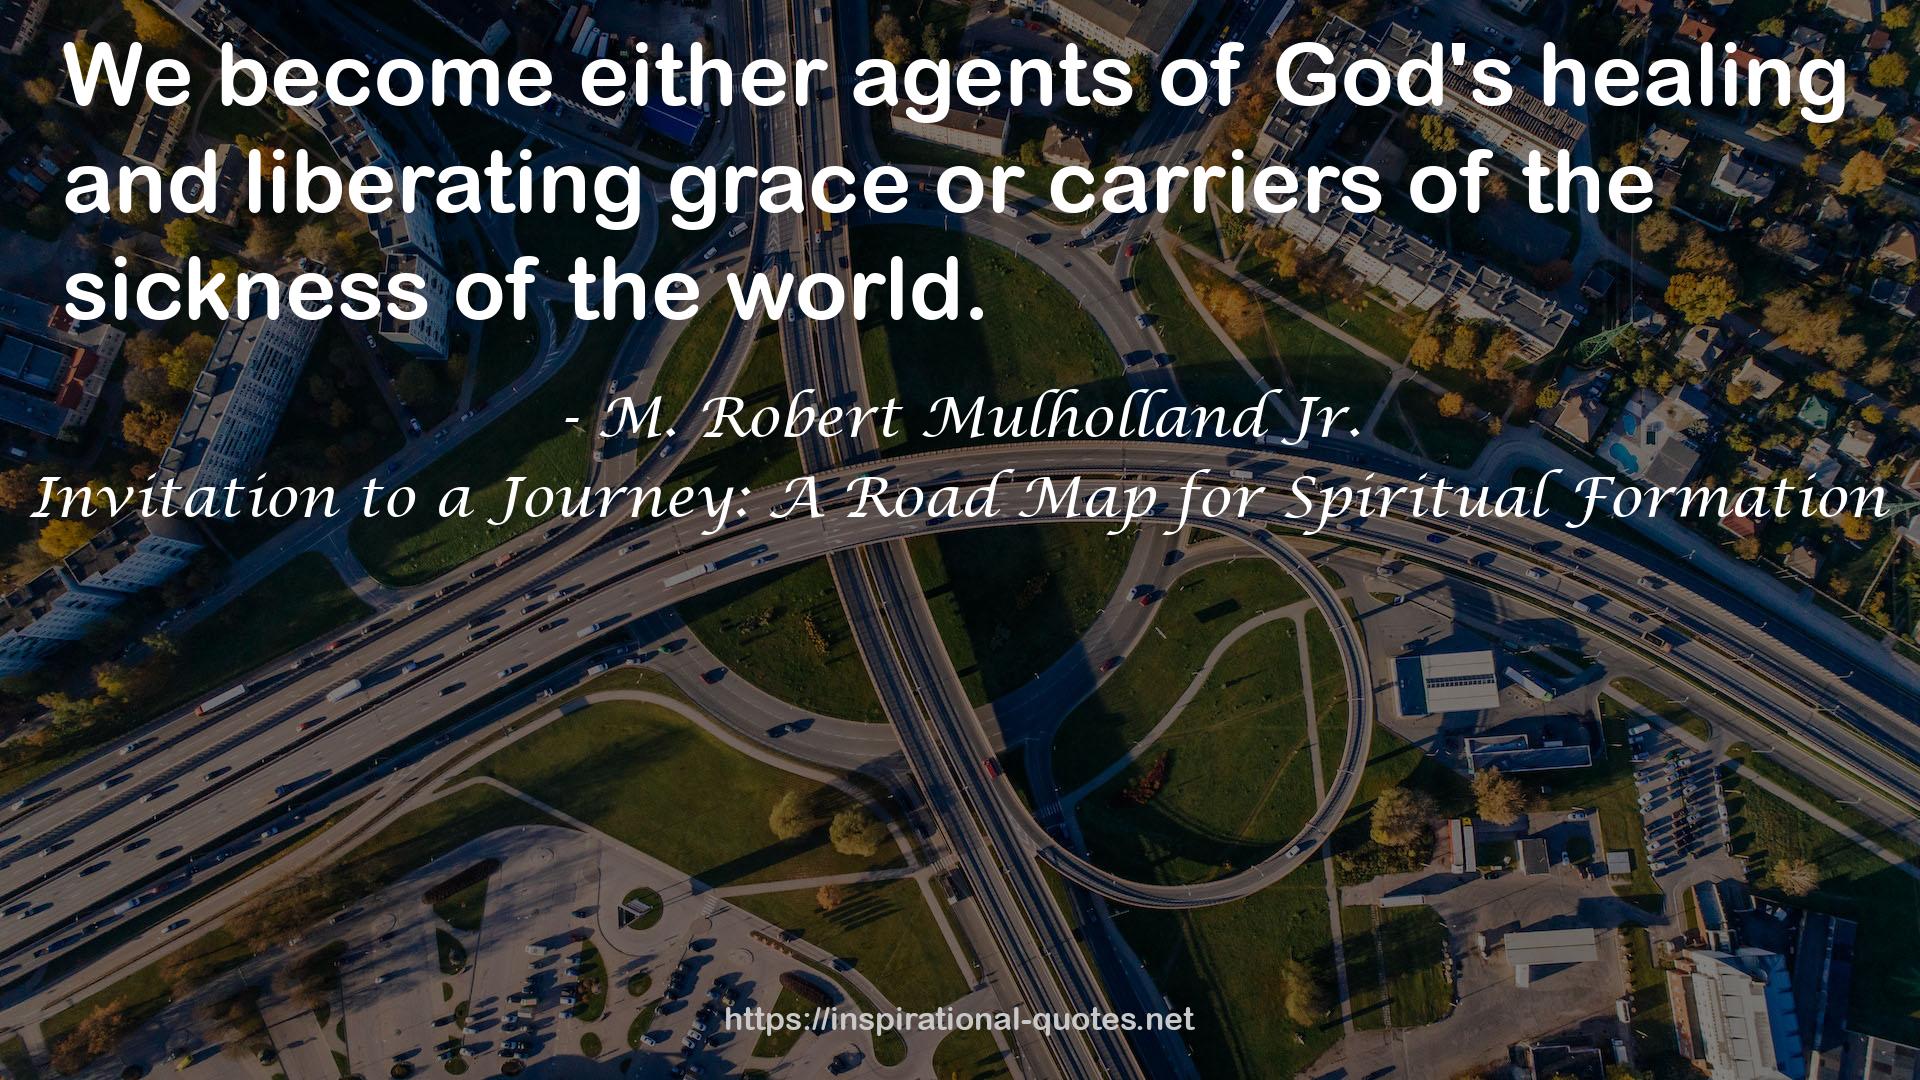 Invitation to a Journey: A Road Map for Spiritual Formation QUOTES